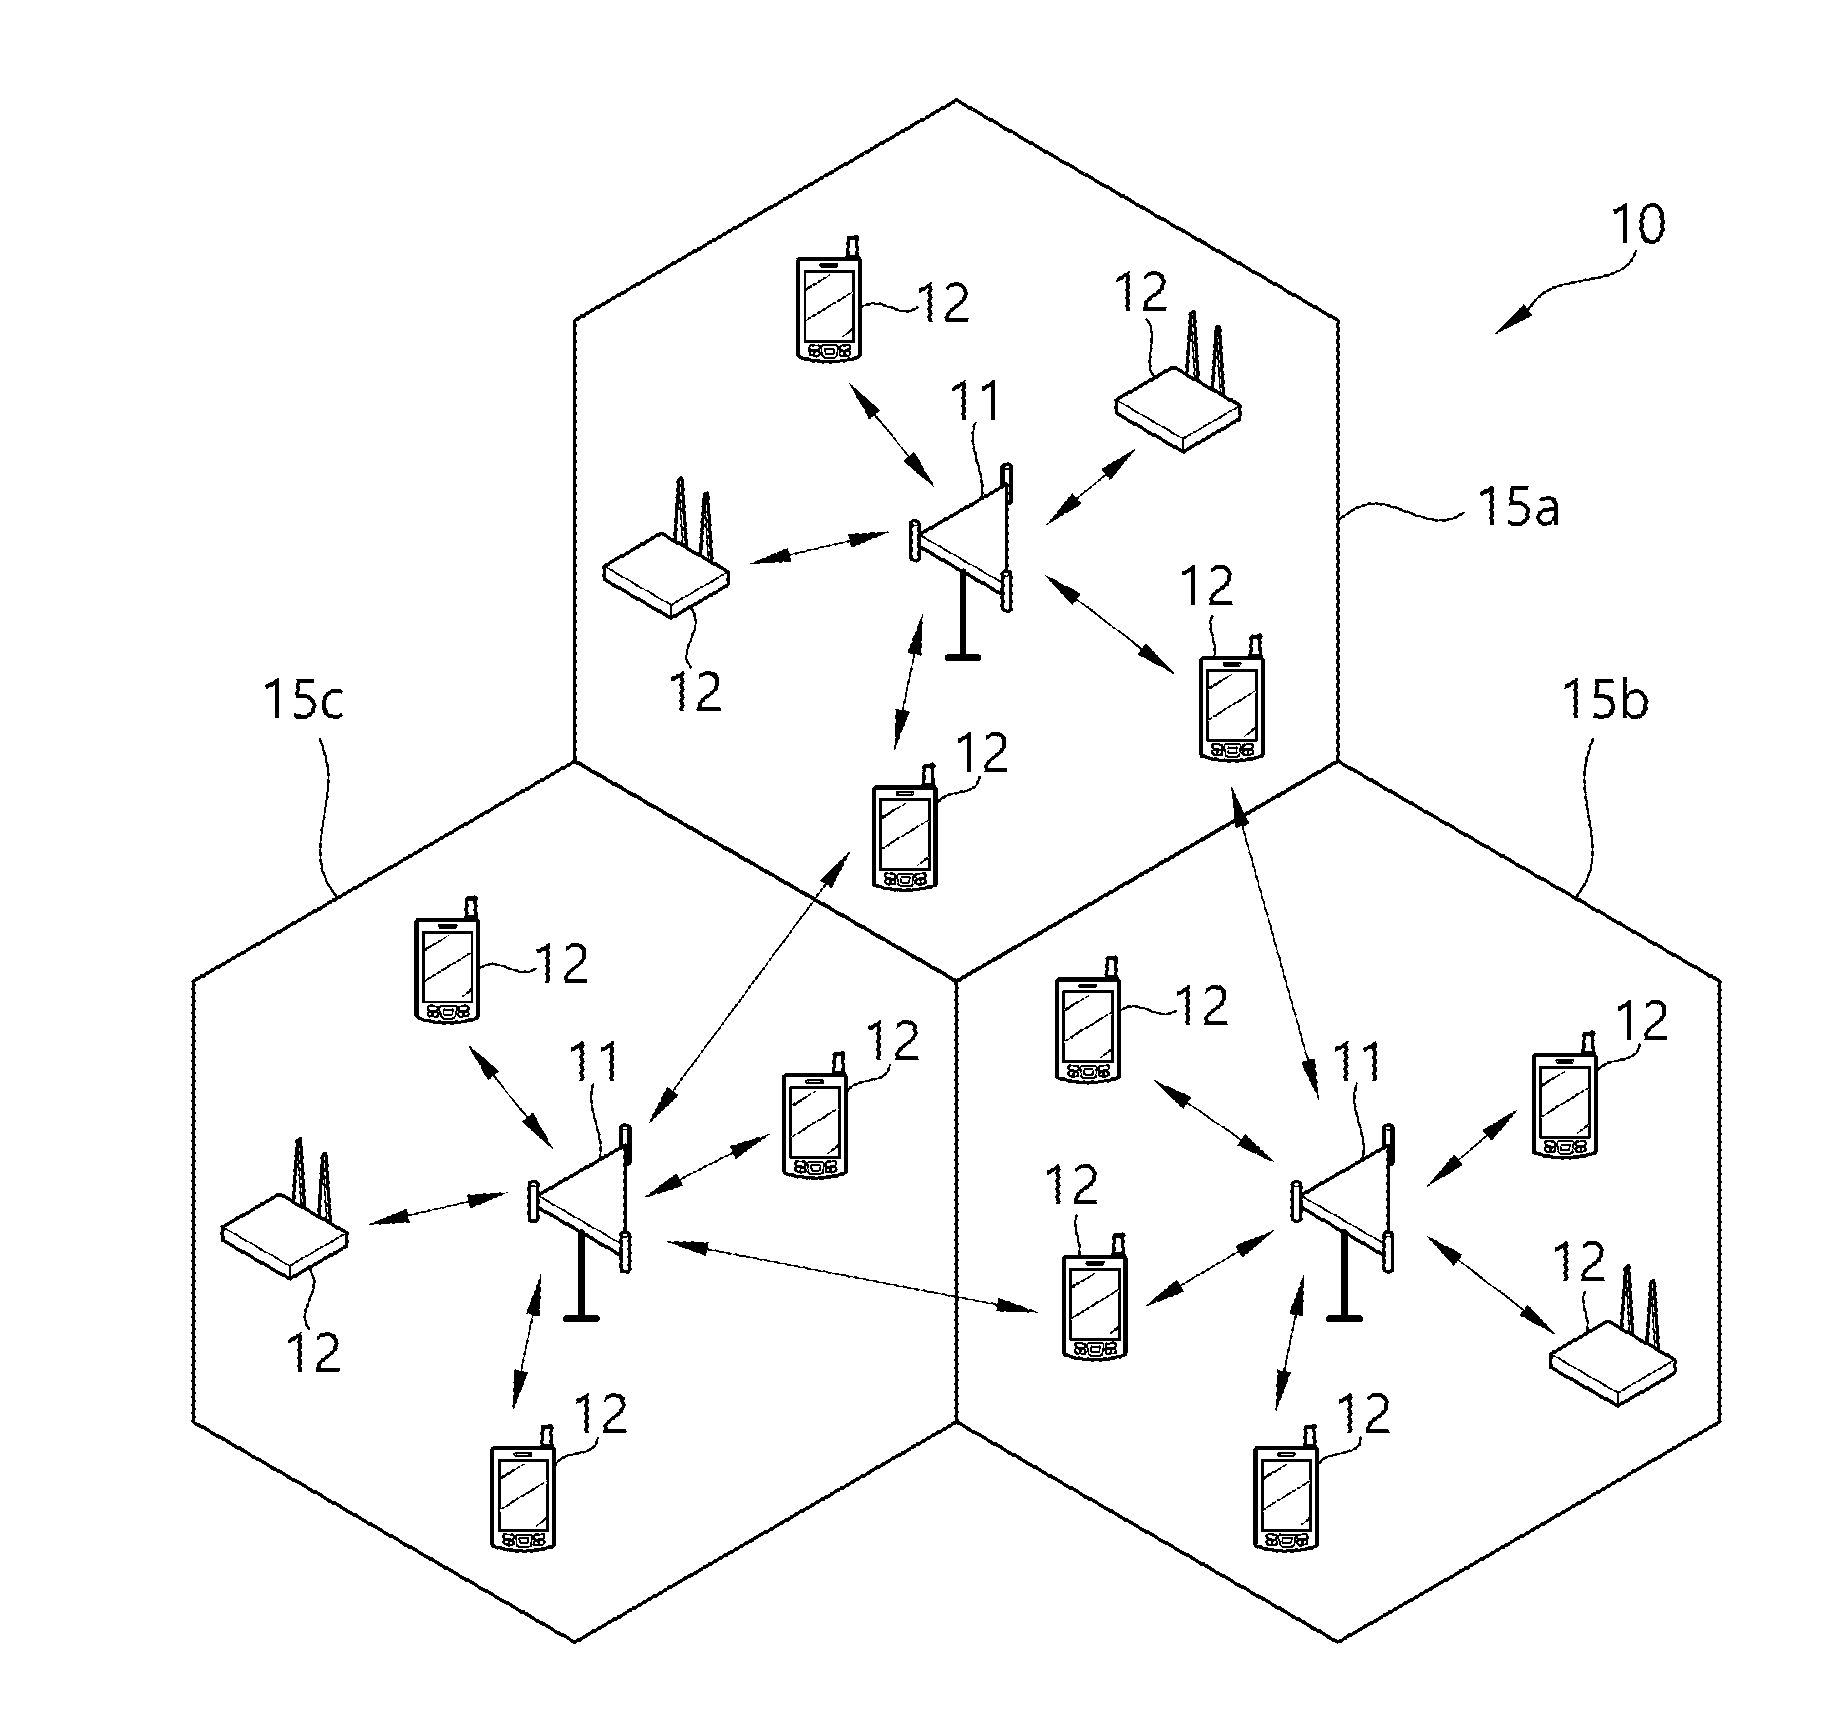 Method and apparatus for indicating activation/deactivation of serving cell in wireless communication system using multiple component carrier